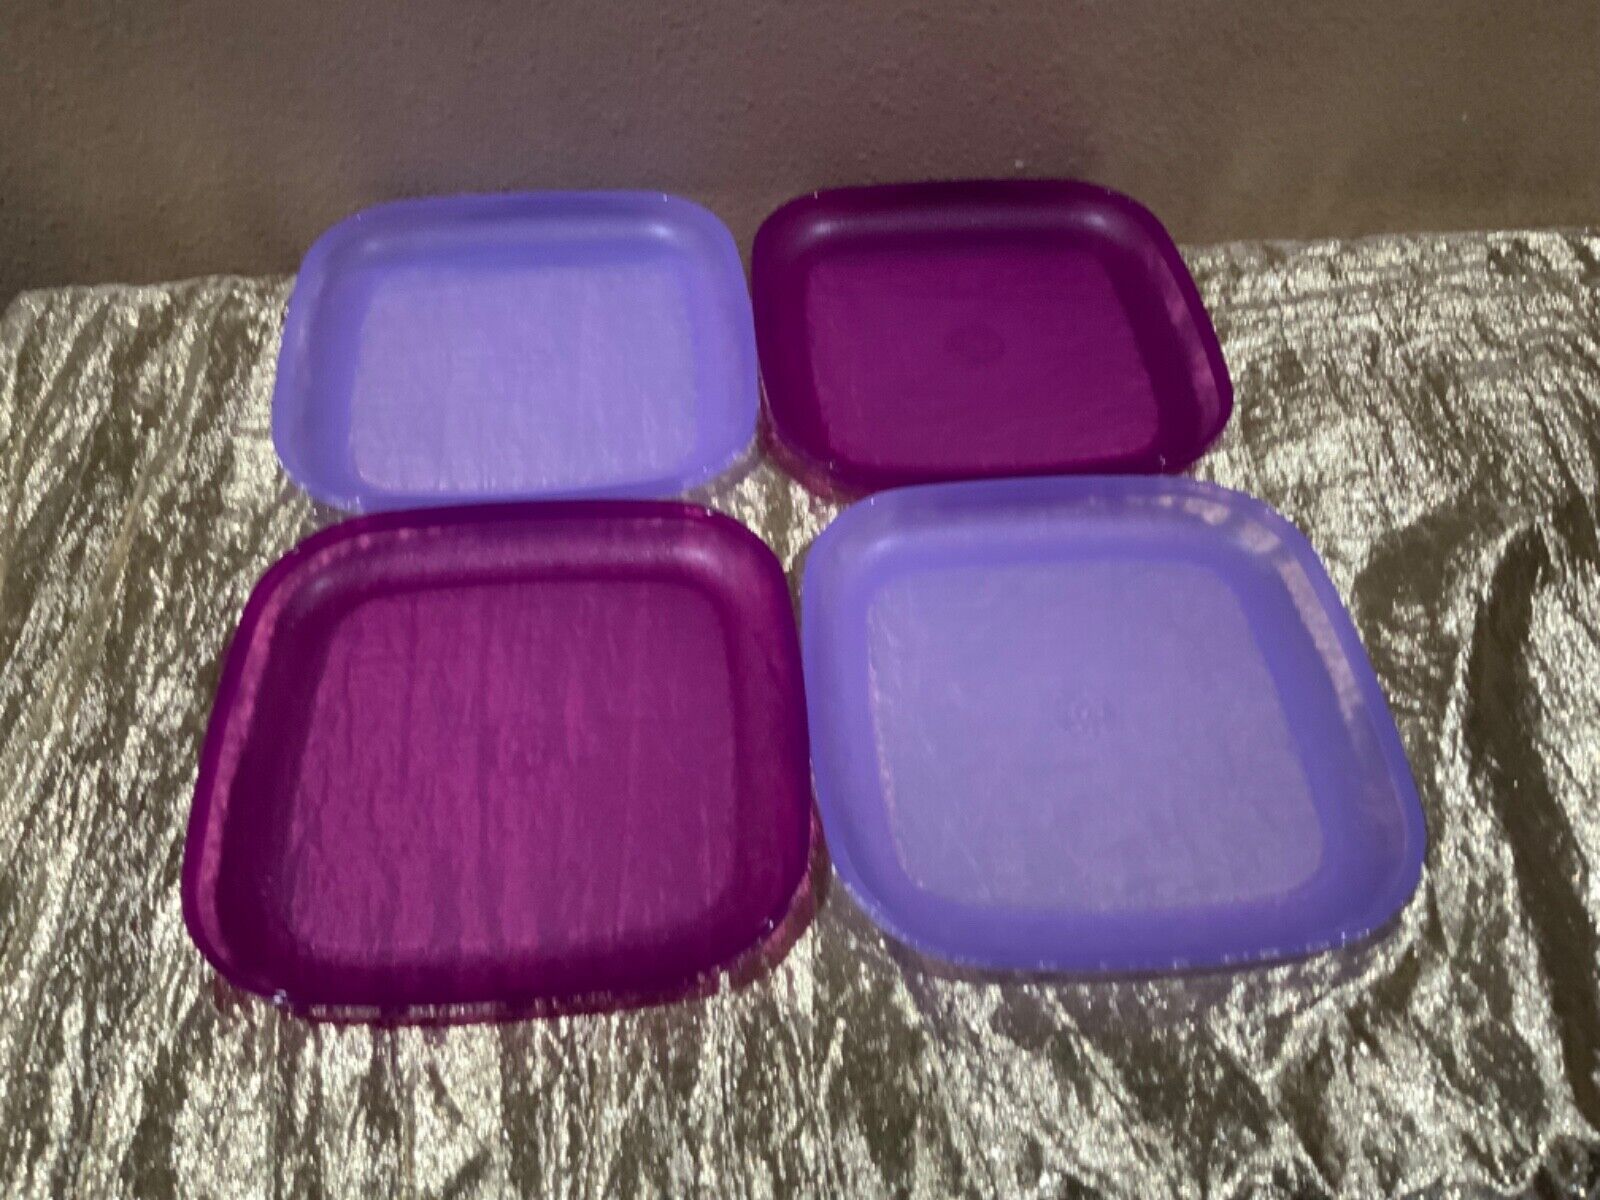 New Set 4 Tupperware Luncheon Plates 8” Square Raised Sides Mulberry/Lilac Color